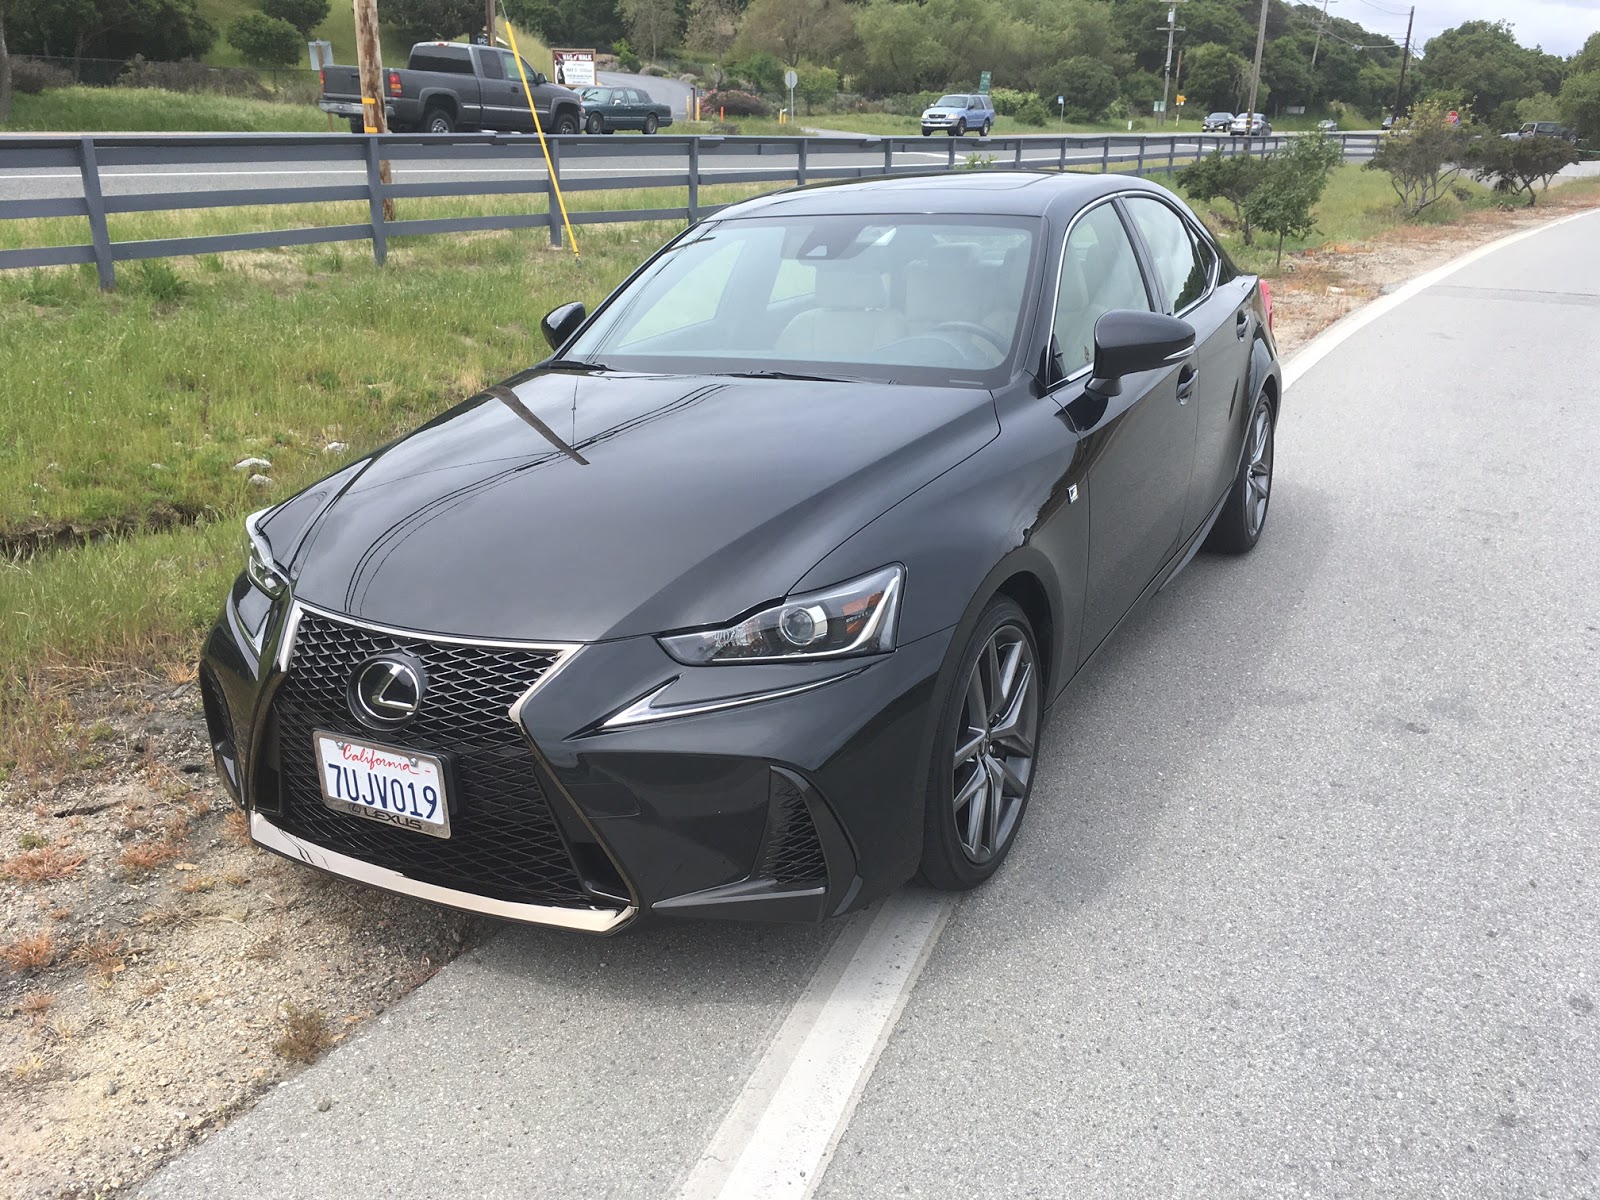 30 Minutes With The 2017 Lexus IS 200t F SPORT